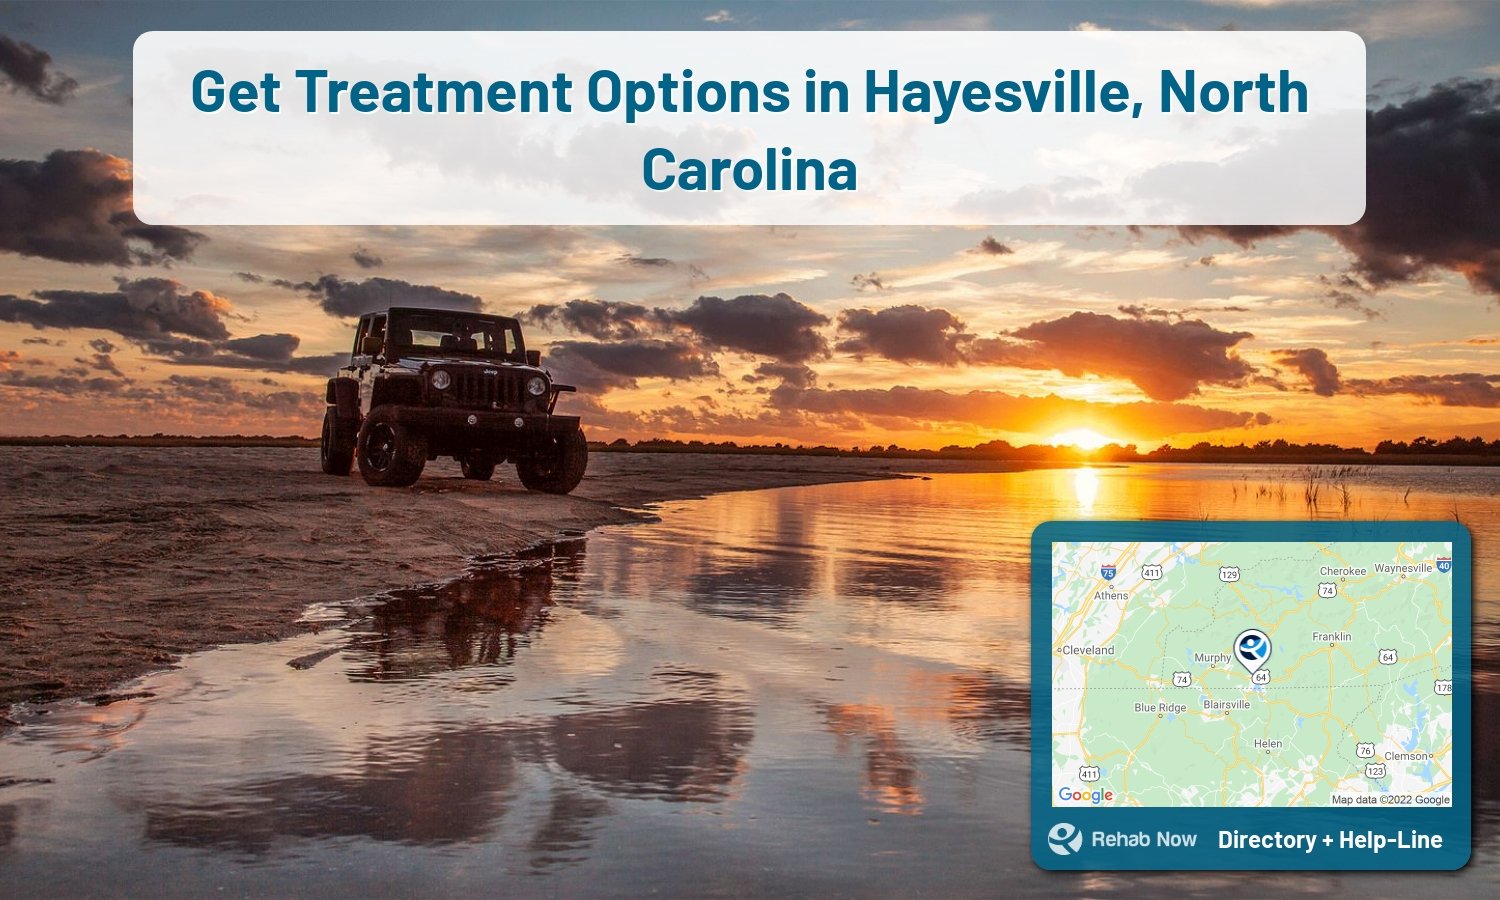 Need treatment nearby in Hayesville, North Carolina? Choose a drug/alcohol rehab center from our list, or call our hotline now for free help.